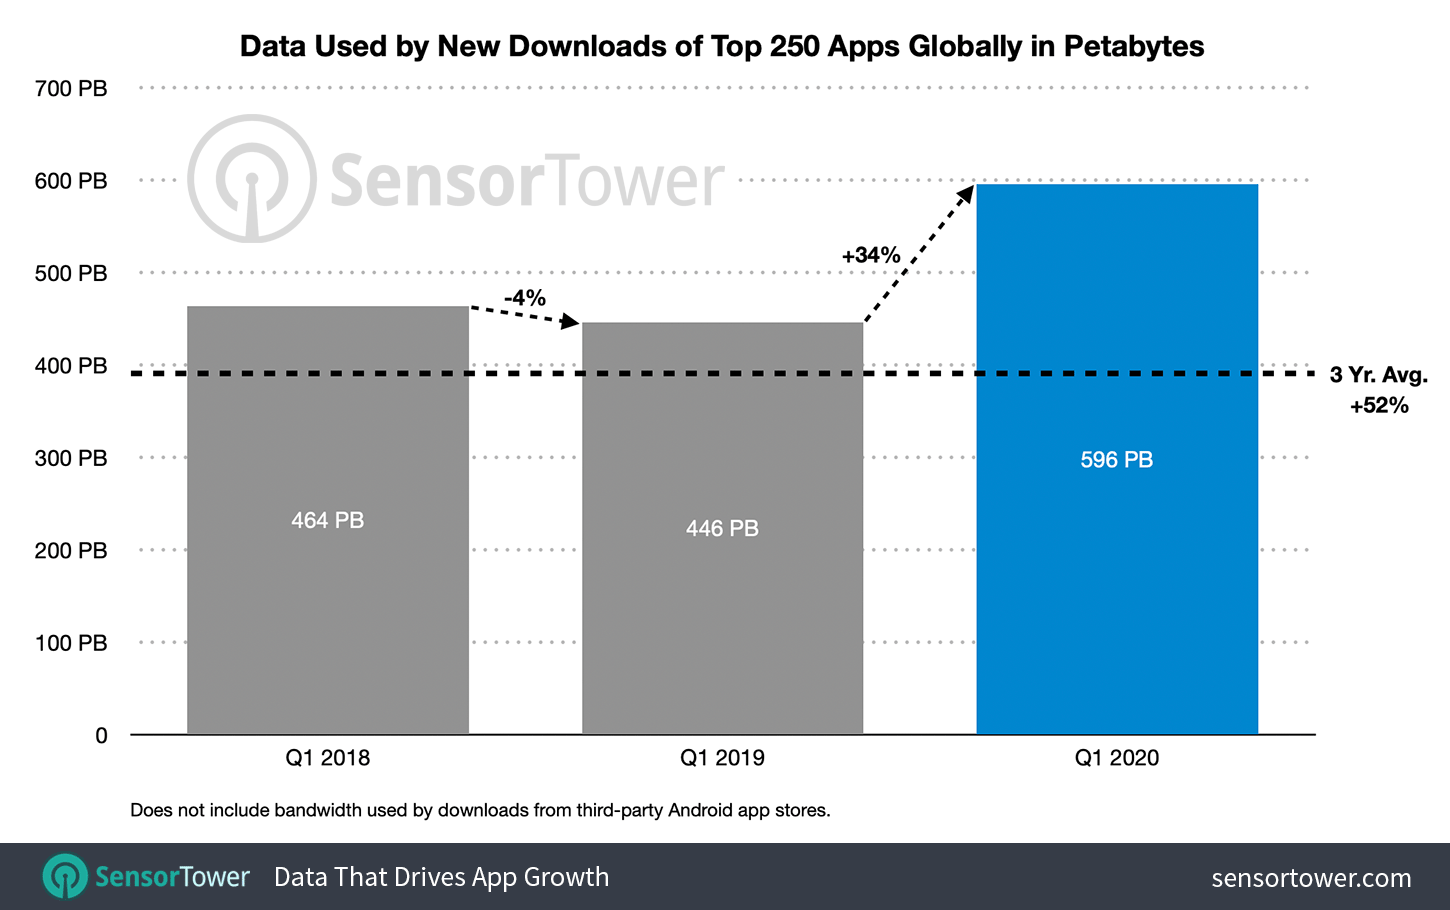 Internet Bandwidth Used for Mobile App Downloads, Q1 2017 to Q1 2020